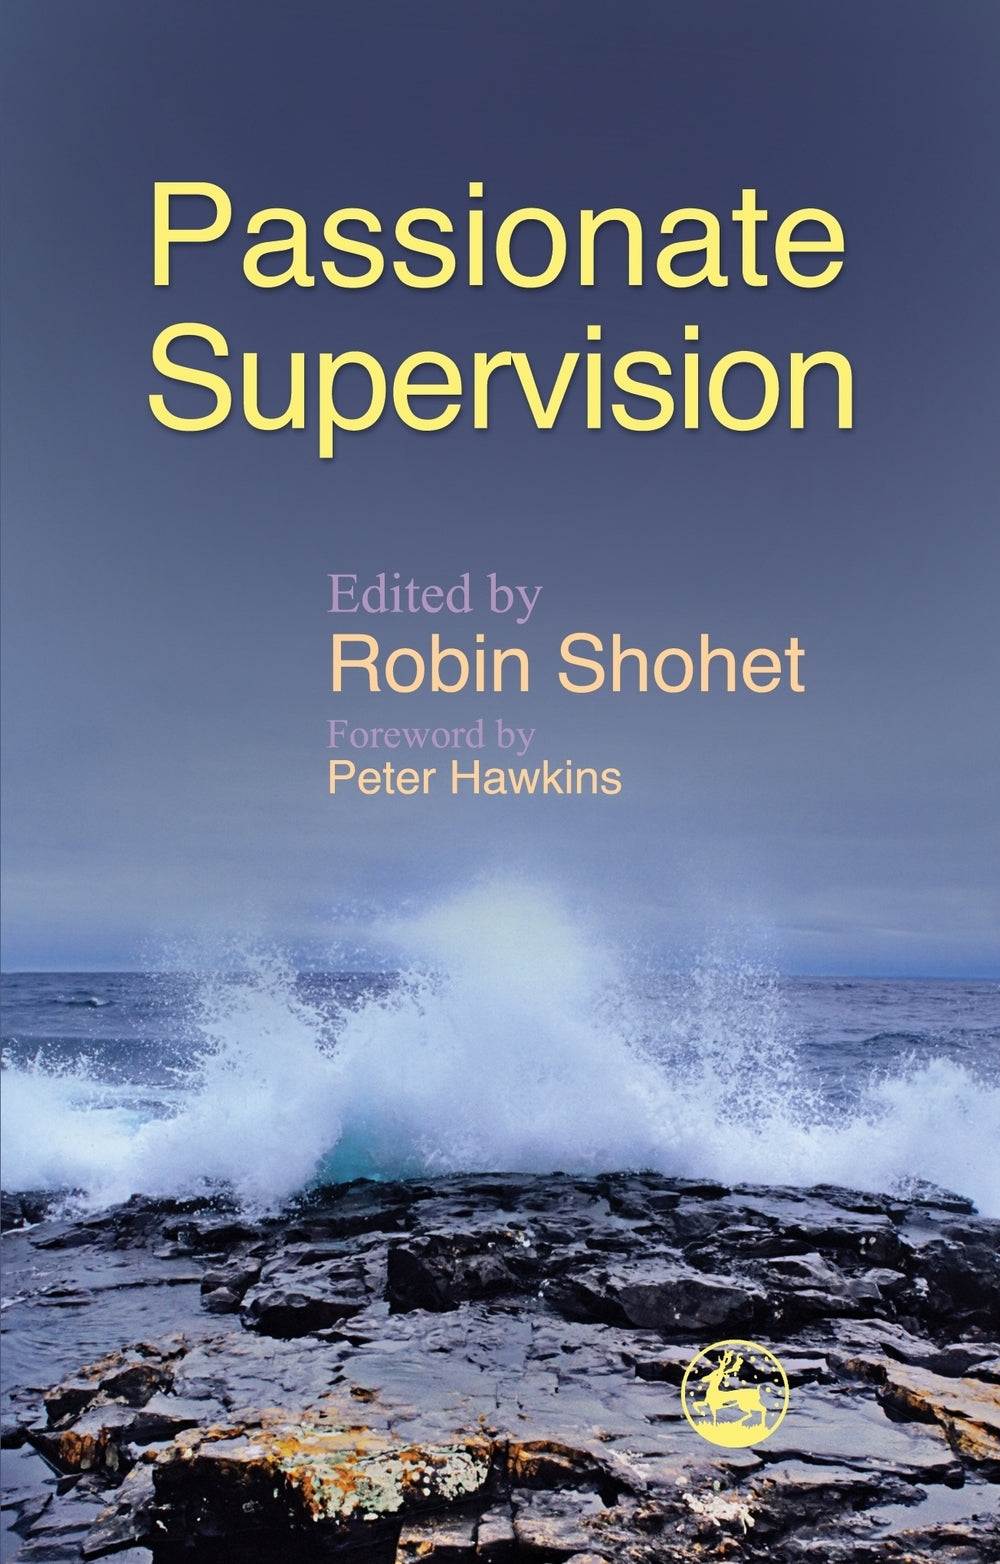 Passionate Supervision by No Author Listed, Robin Shohet, Peter Hawkins